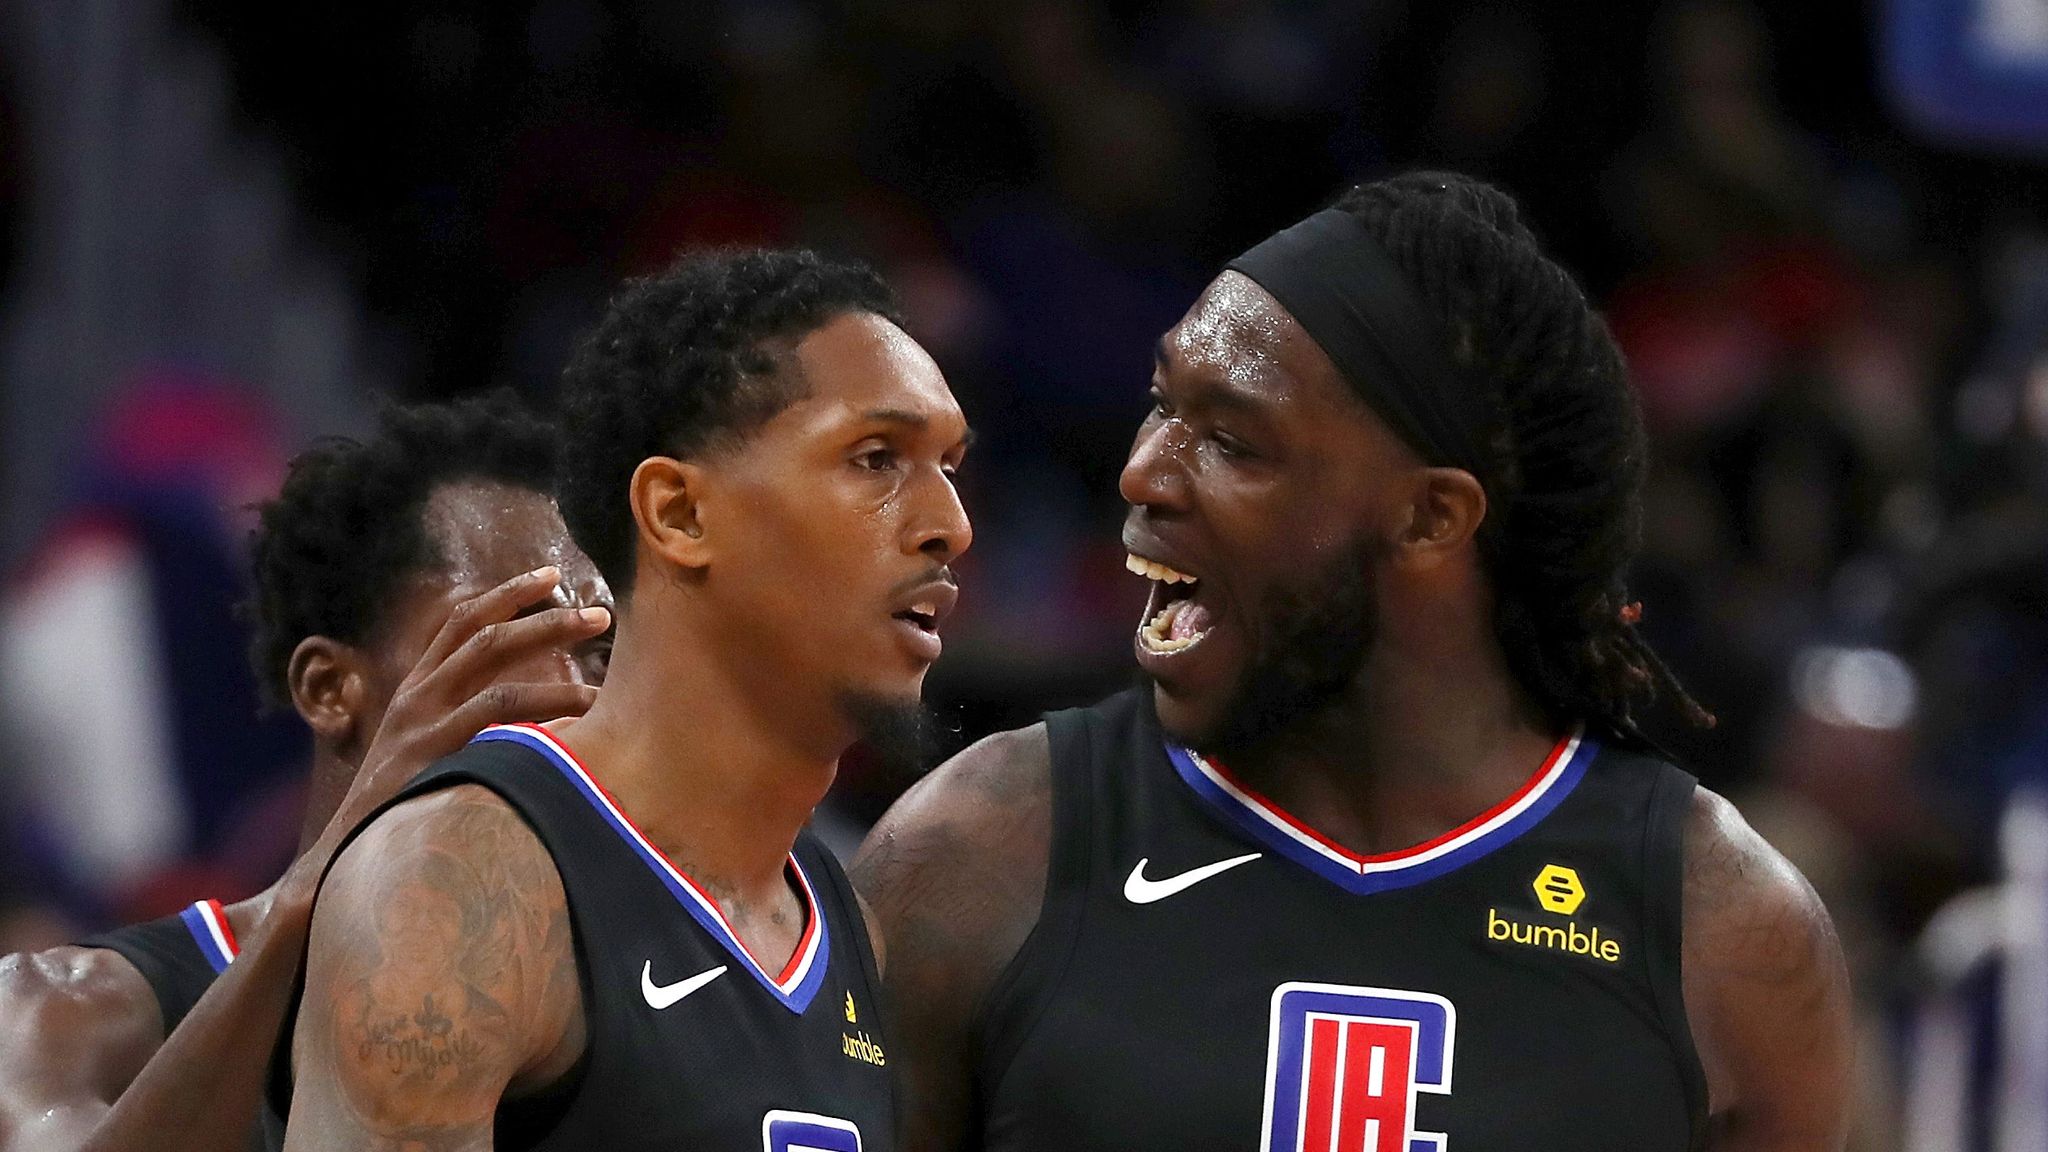 Los Angeles Clippers Guard Lou Williams looks on during a NBA game